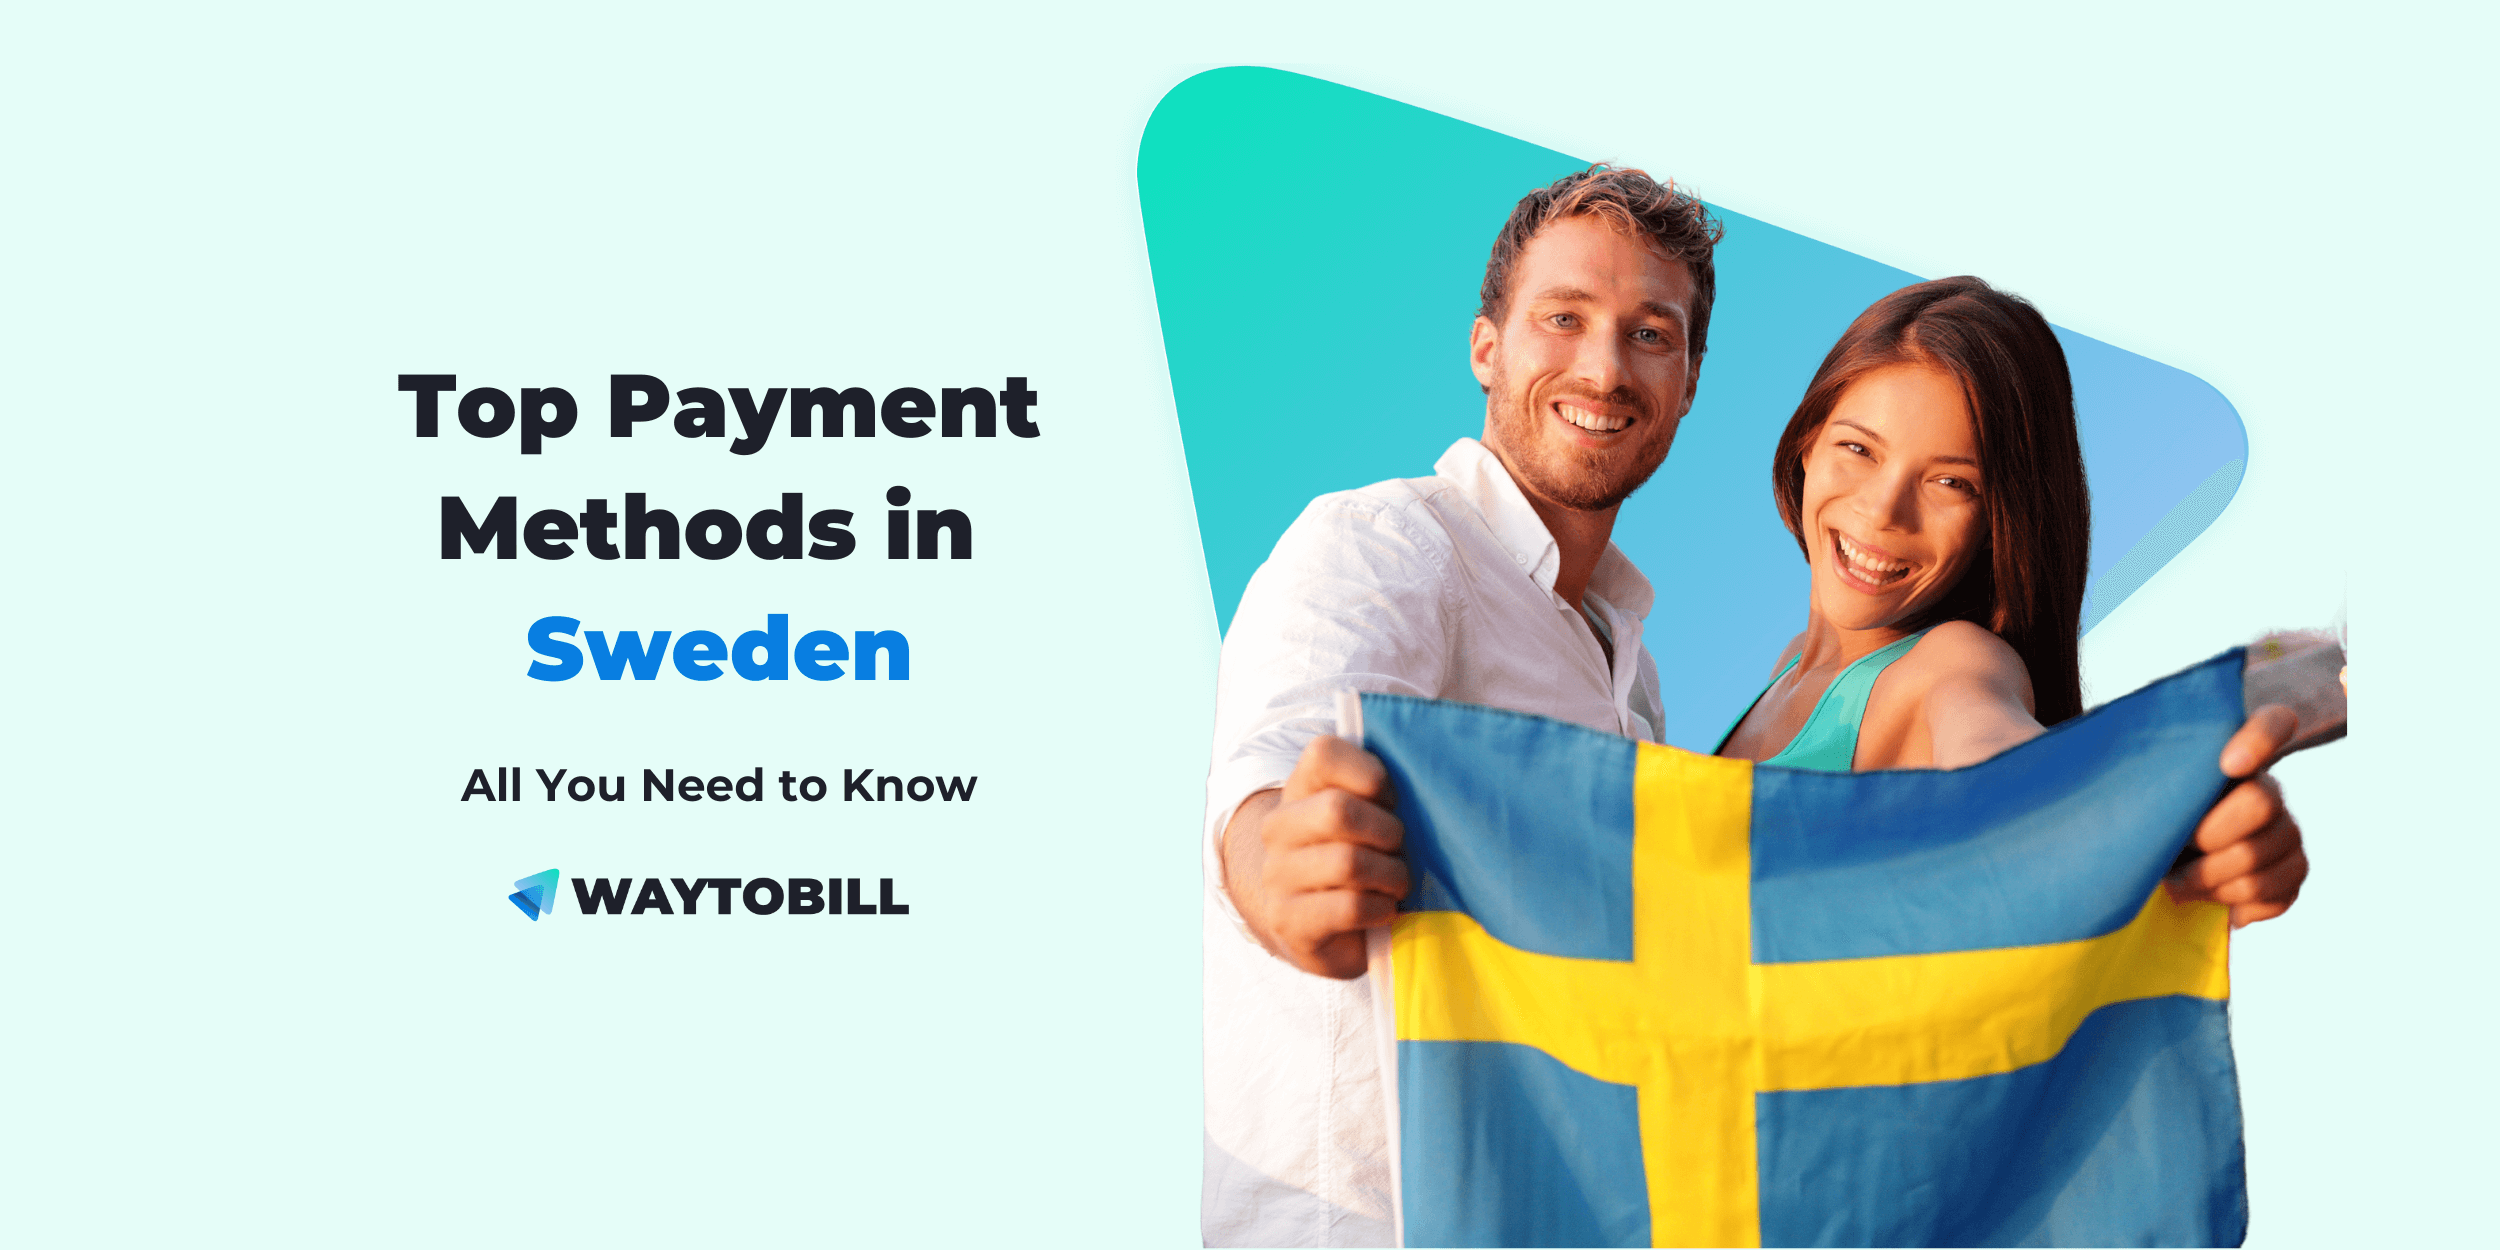 Top Payment Methods in Sweden: All You Need to Know